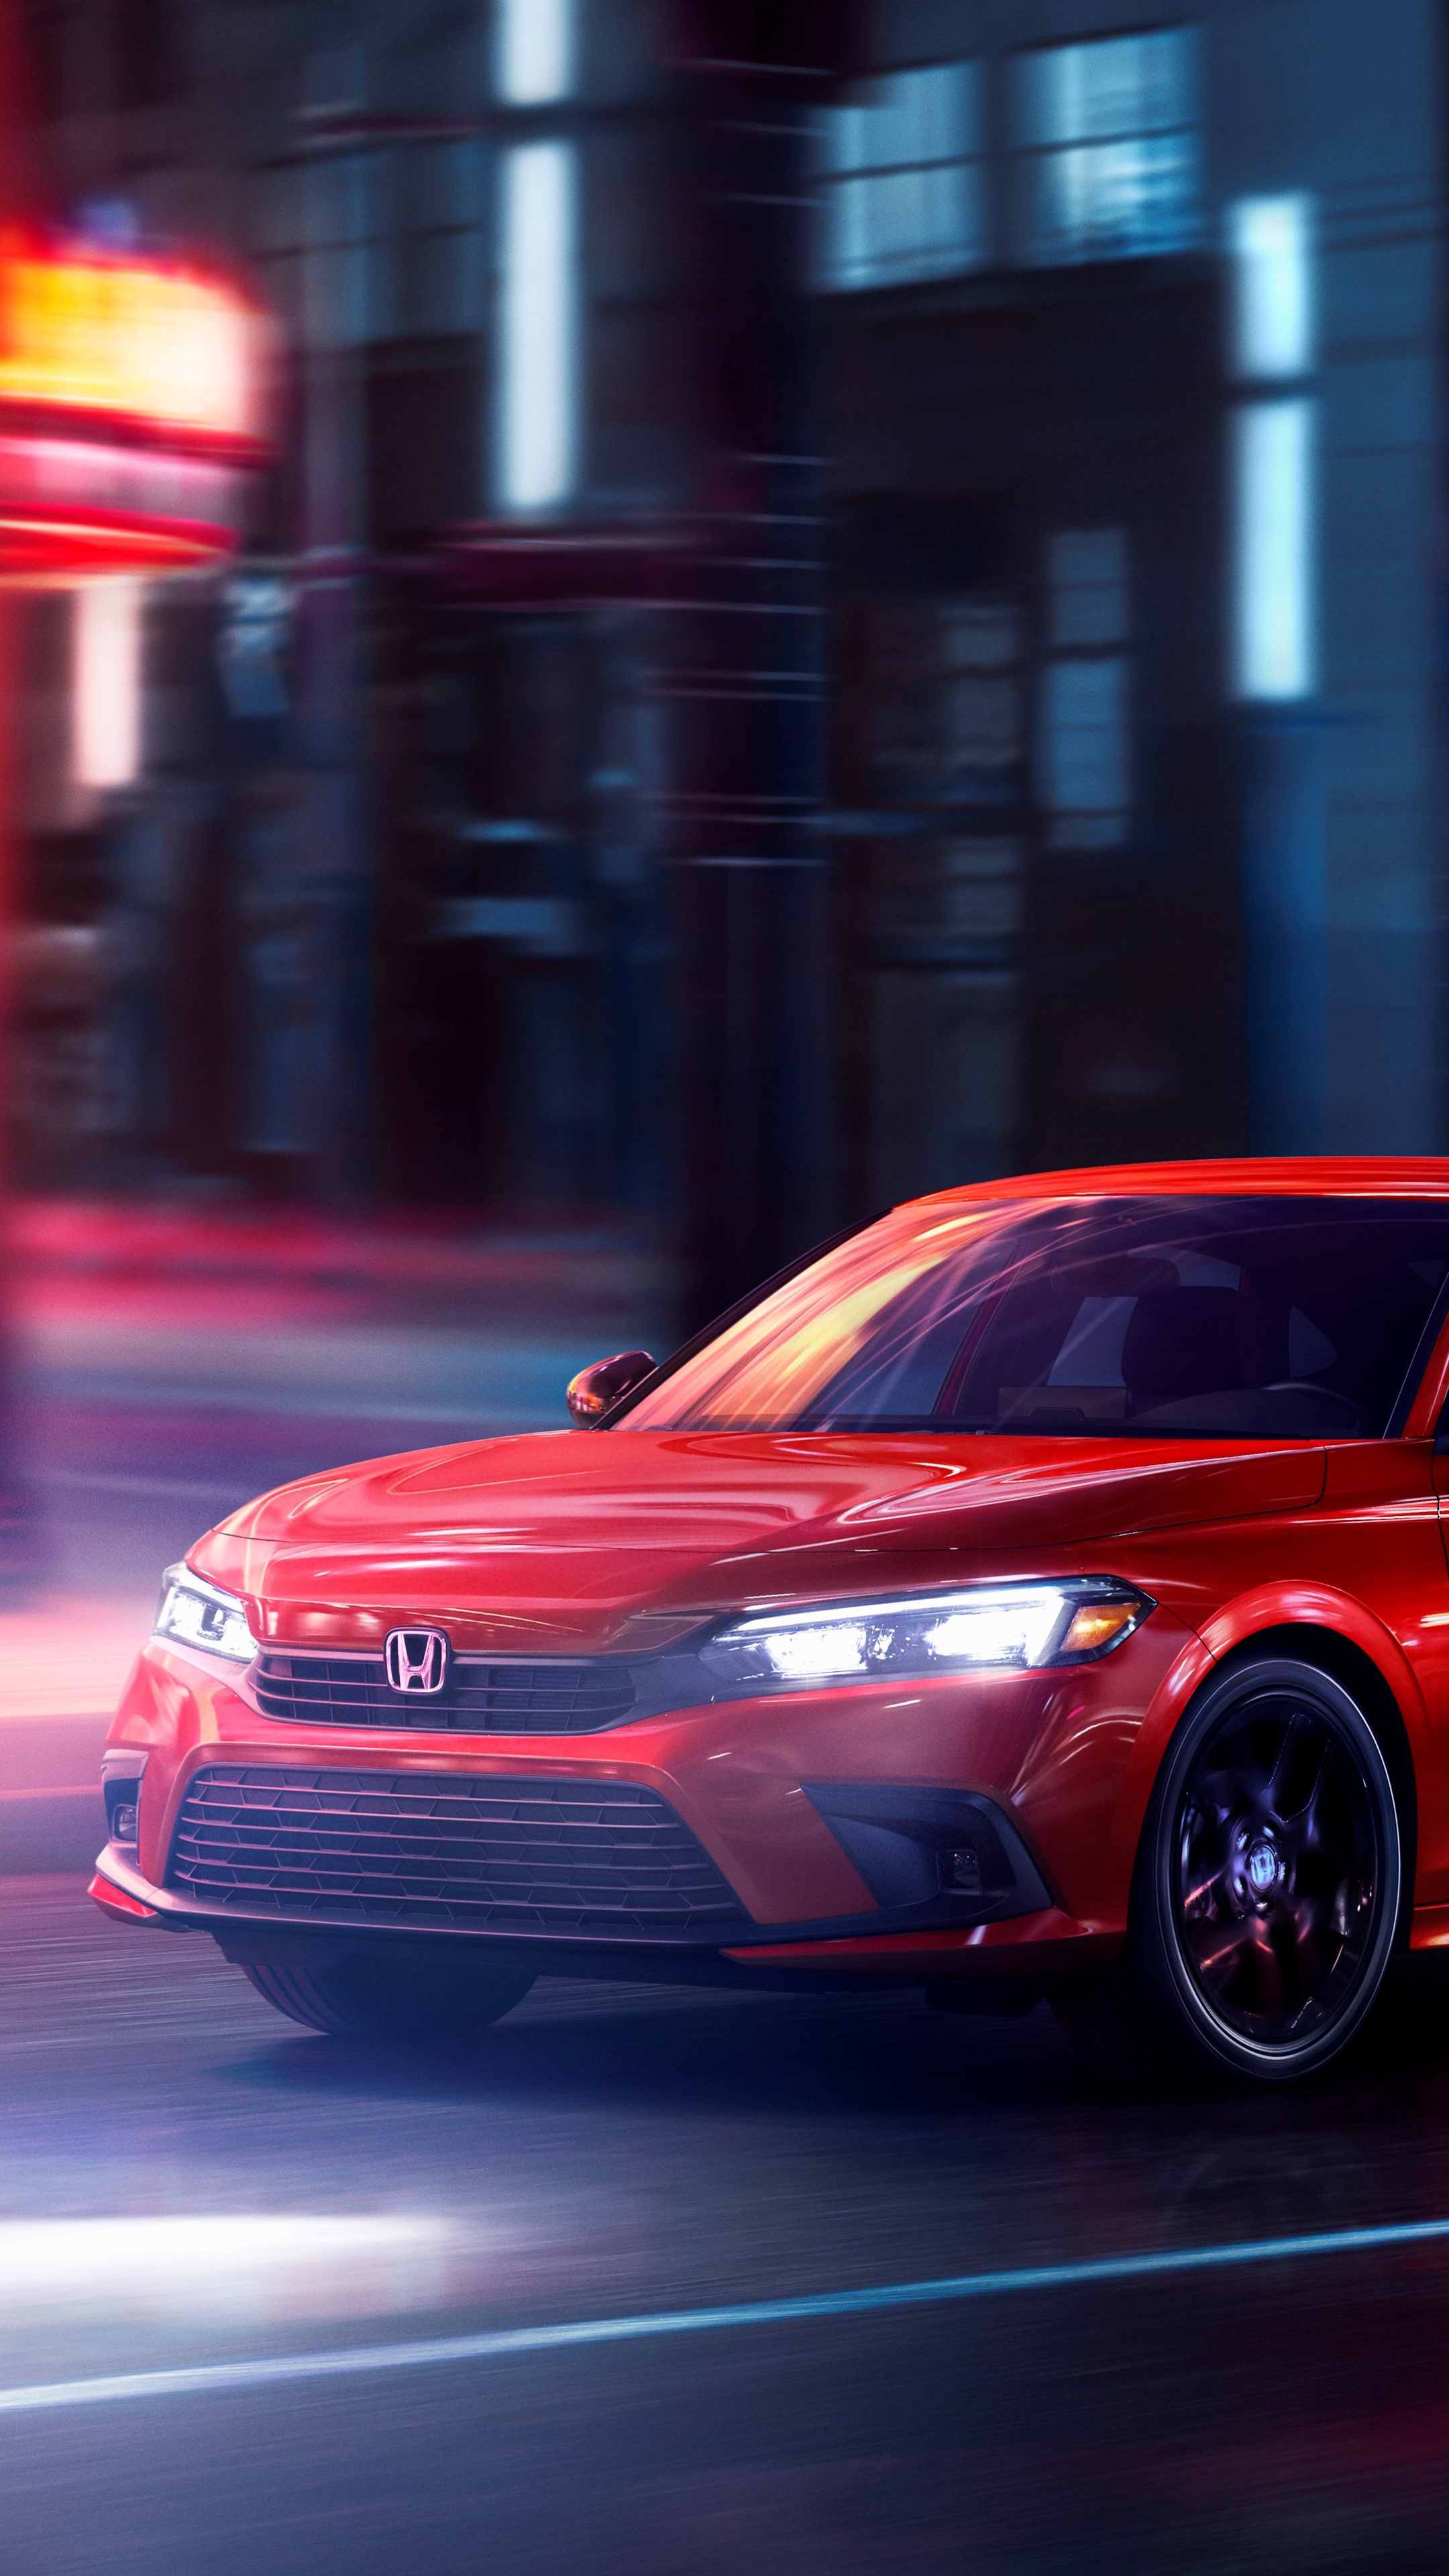 Honda Civic, Sporty and dynamic, Driver-focused technology, Expressive design, 2160x3840 4K Phone